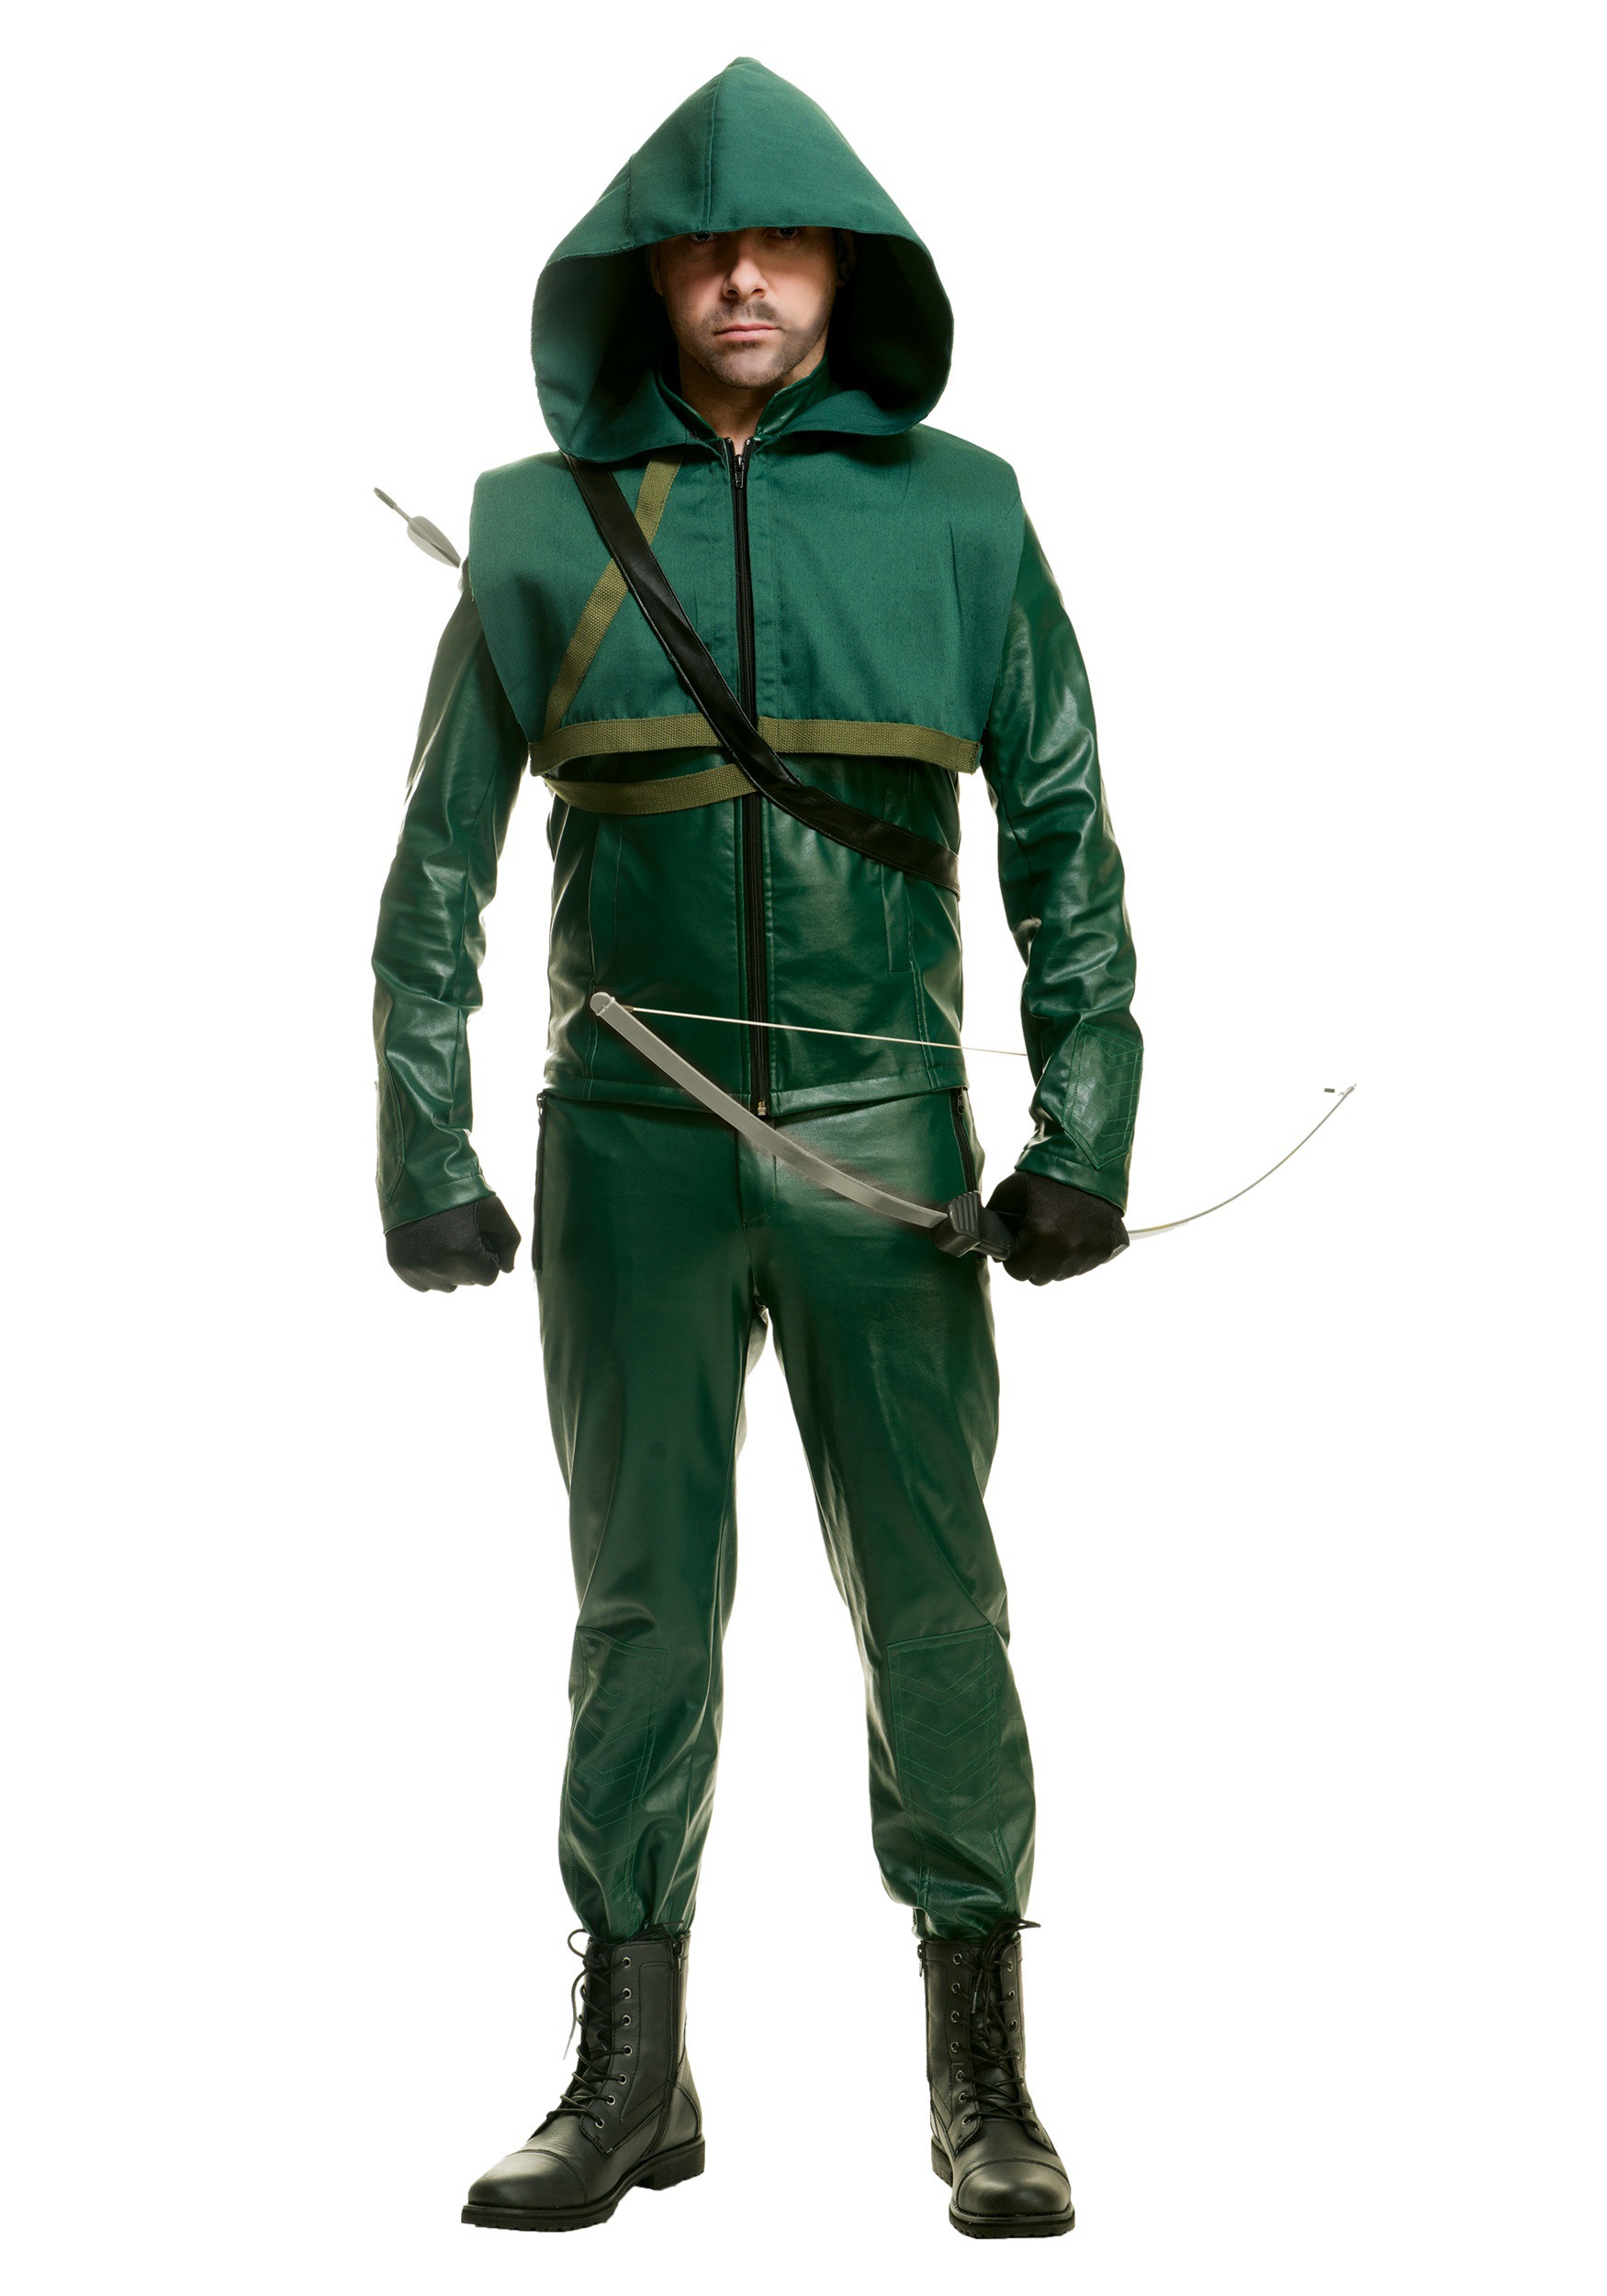 Real green arrow suit not cosplay